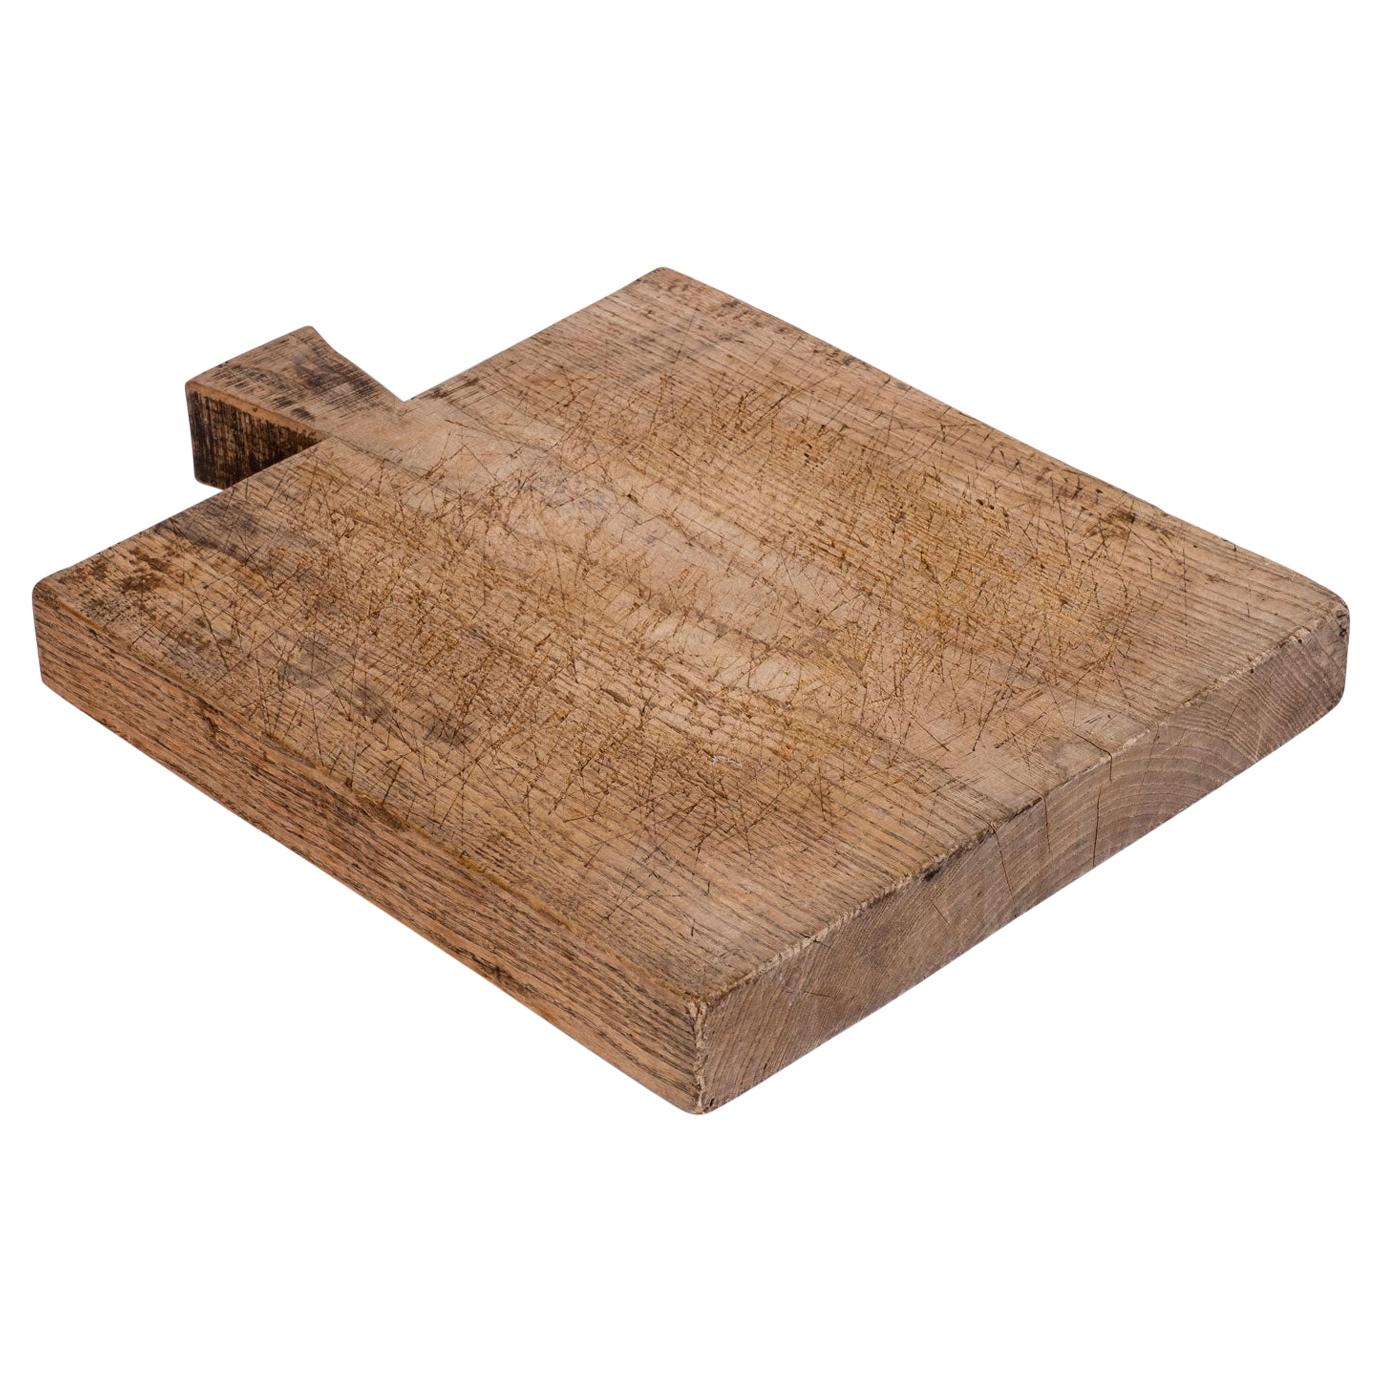 Thick French cutting board from the 19th century.